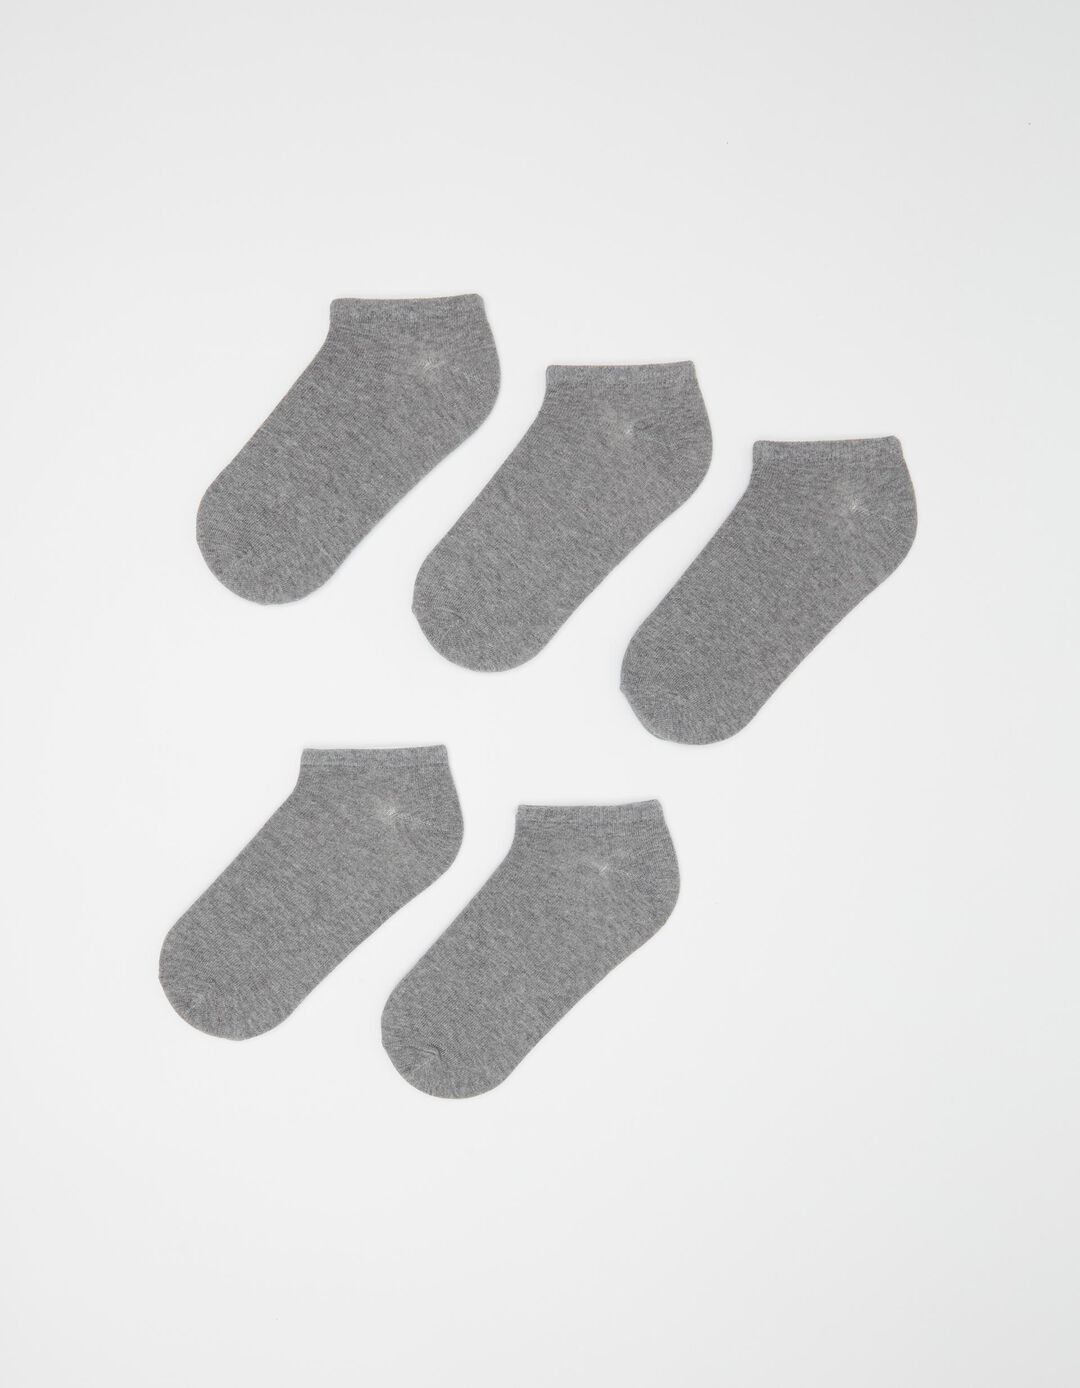 5 Pairs of Invisible Socks Pack, Men, Light Grey